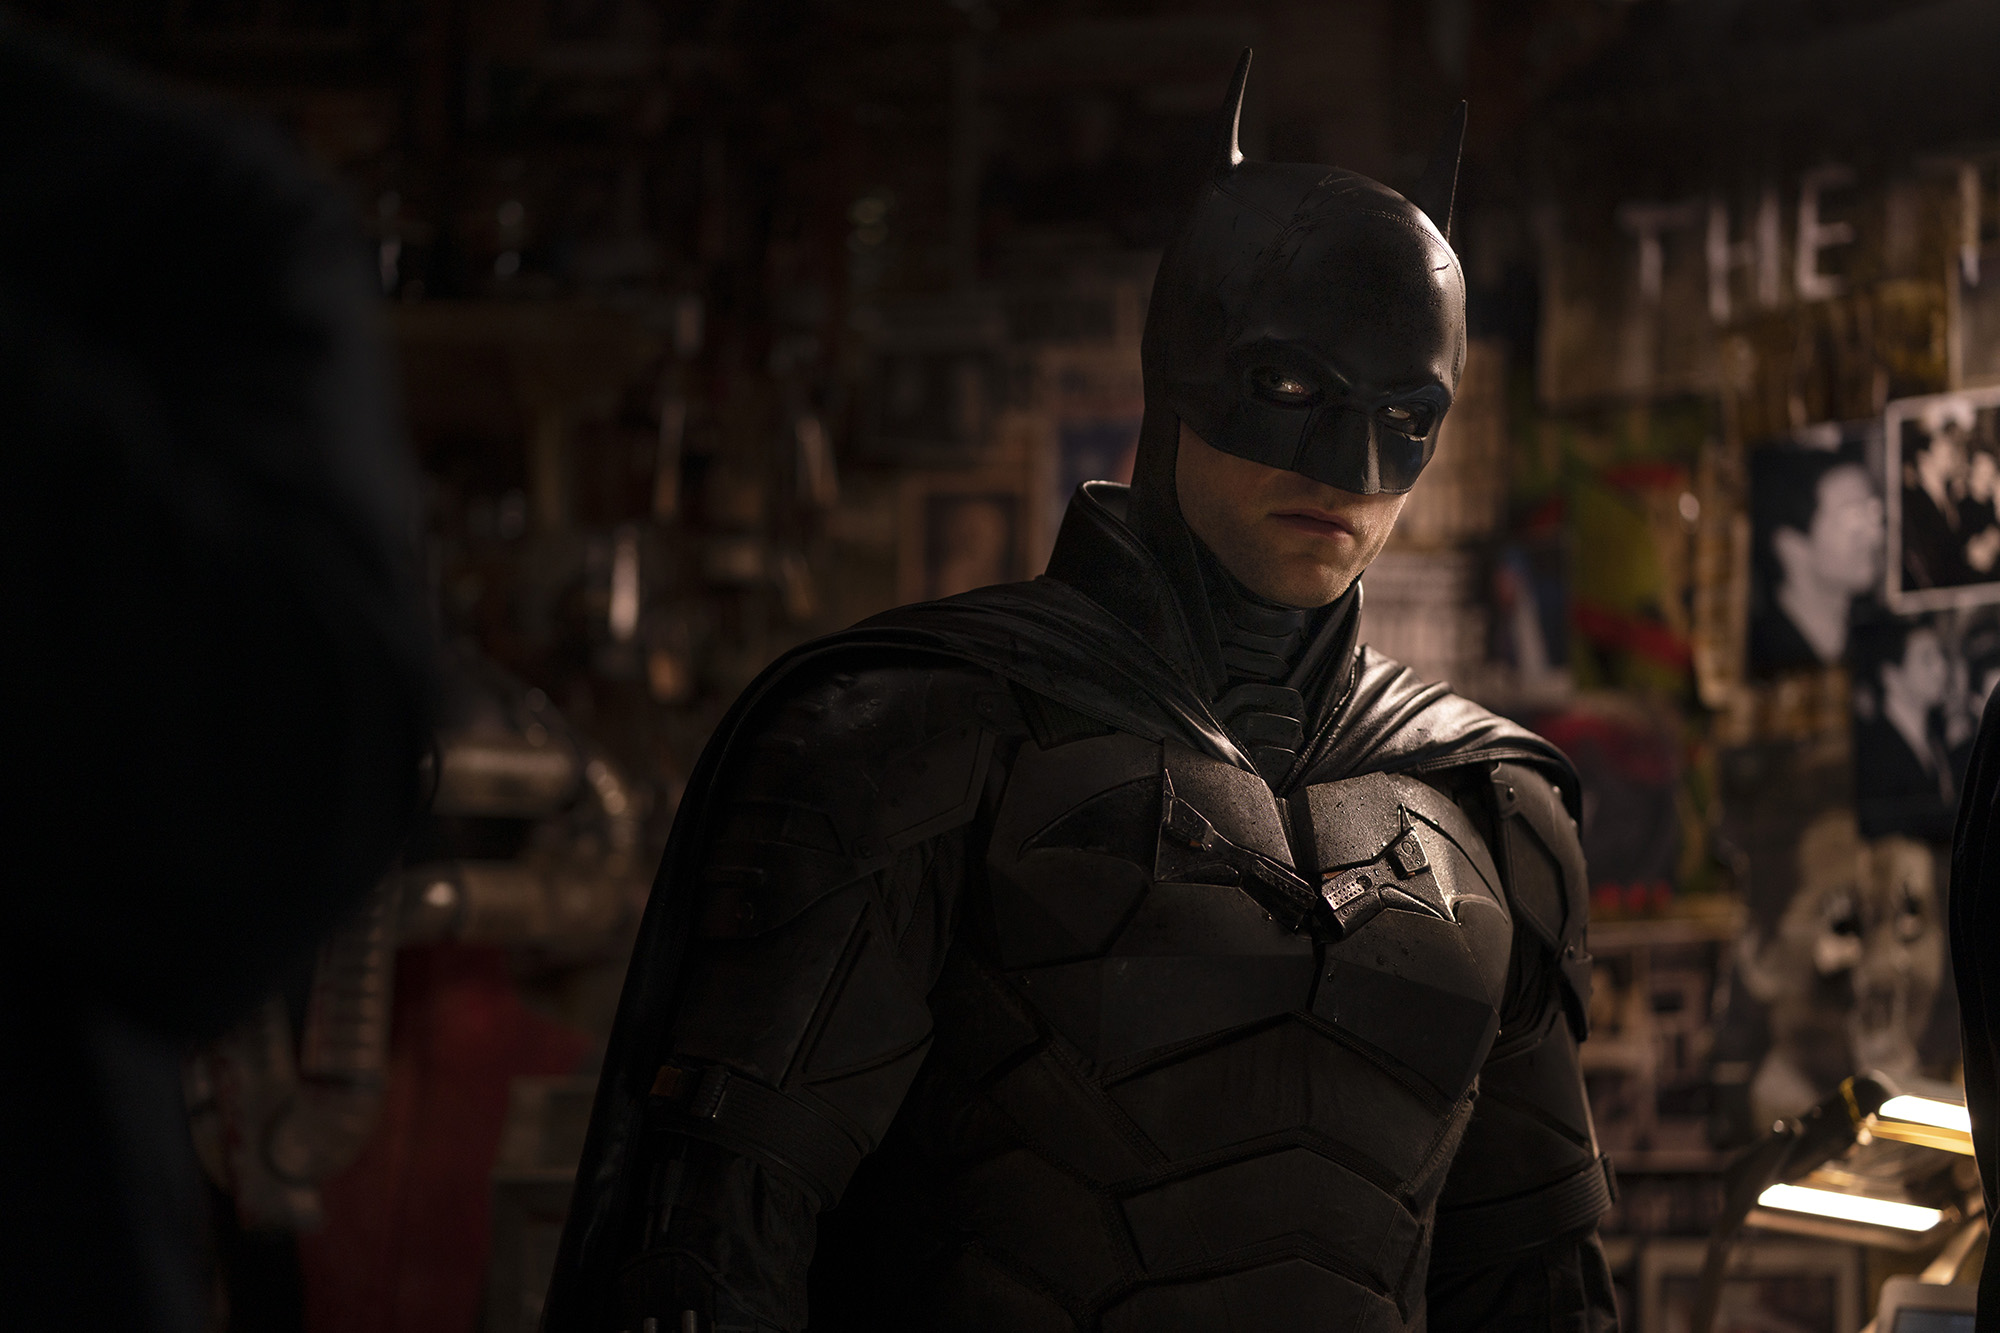 The Batman': Everything to Know About the Robert Pattinson Movie